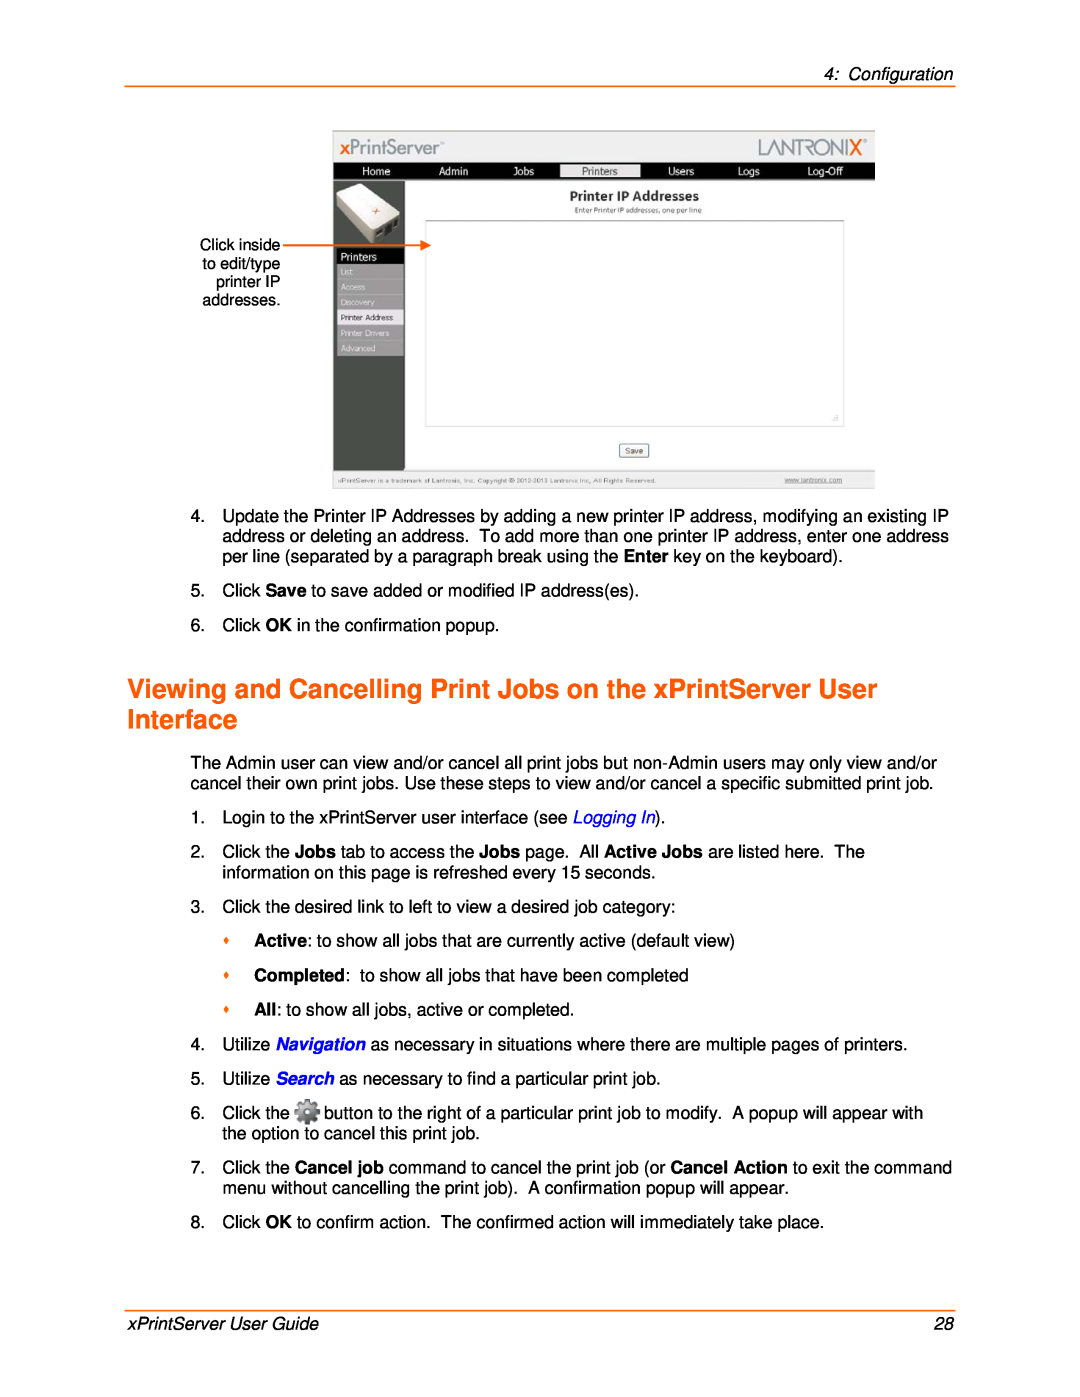 Lantronix 900-603 manual Viewing and Cancelling Print Jobs on the xPrintServer User Interface, Configuration 